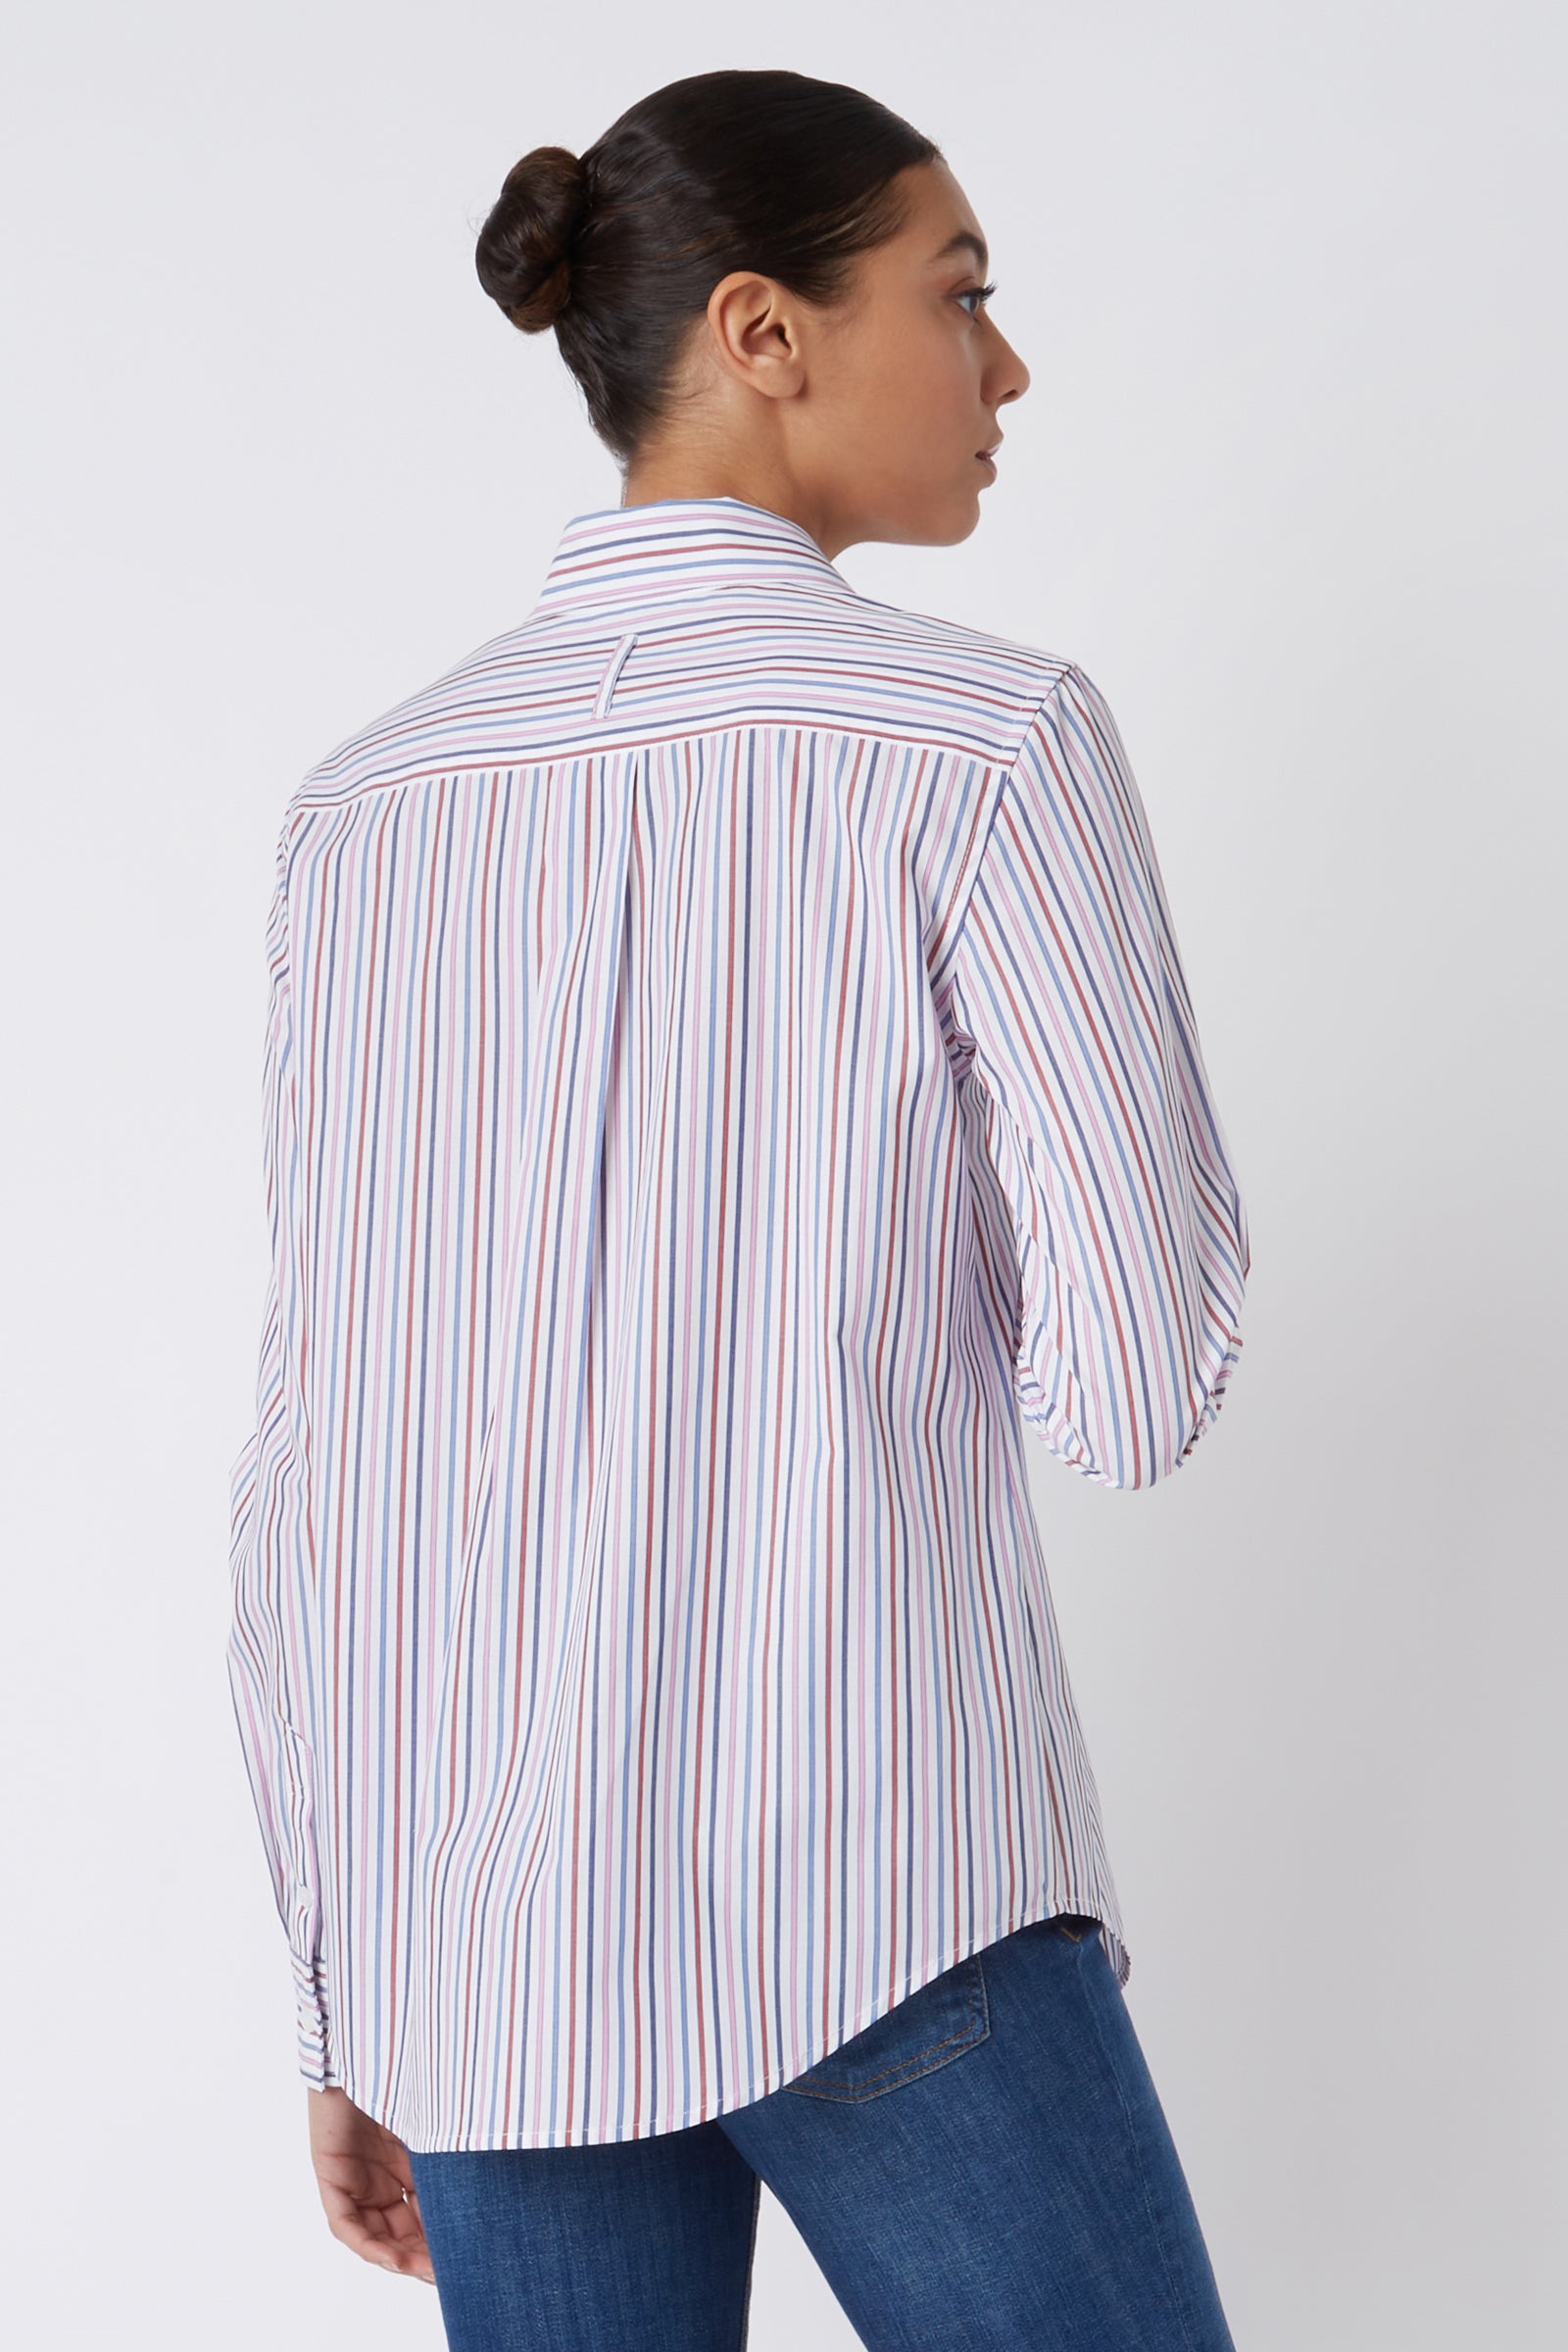 Ginna Box Pleat Shirt in White Stretch Made From a Cotton Blend – KAL RIEMAN